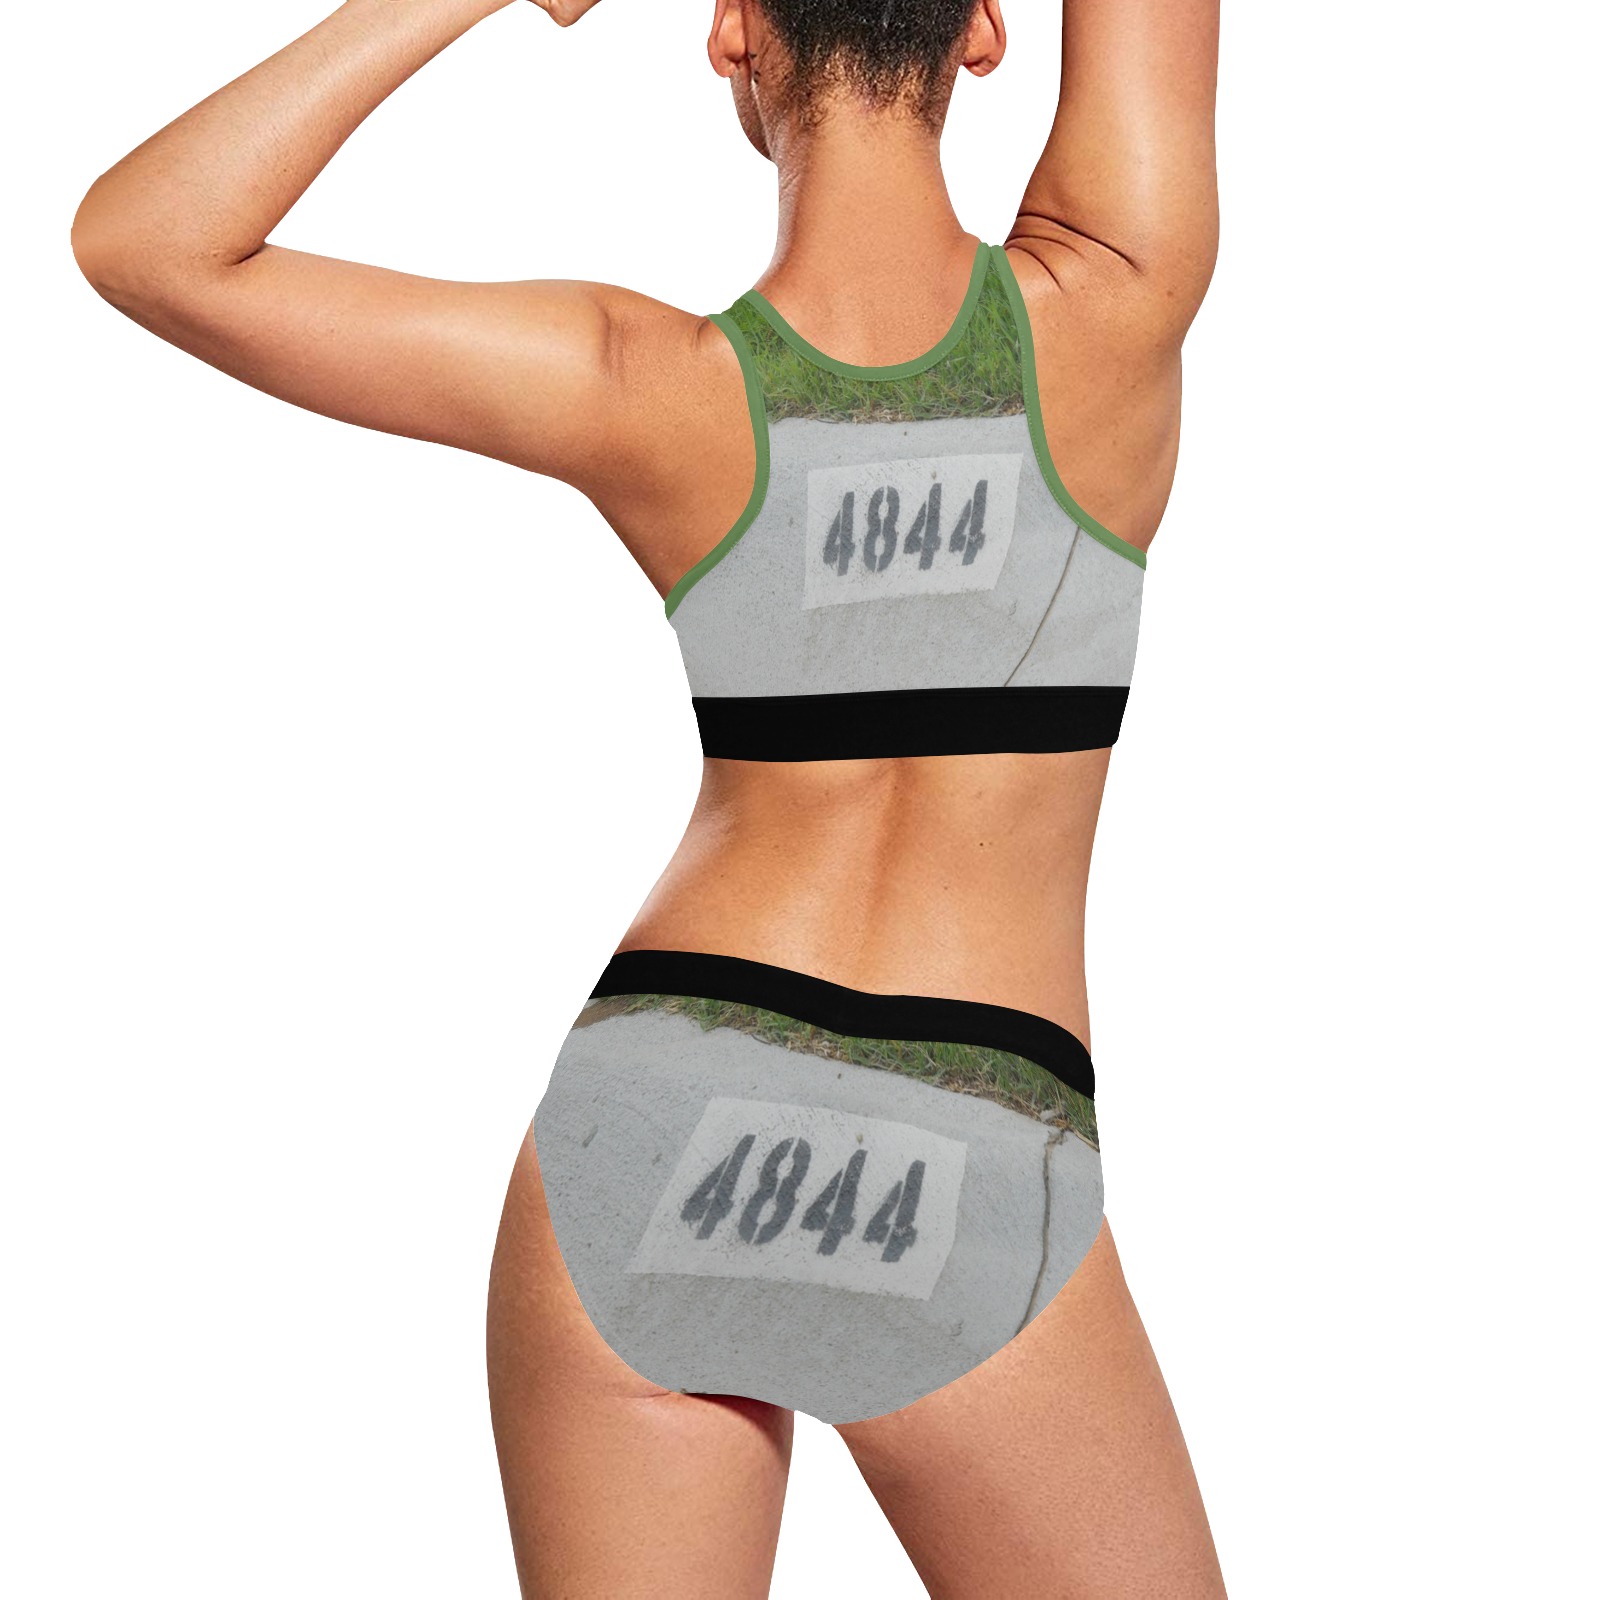 Street Number 4844 with Green Background Women's Sports Bra Yoga Set